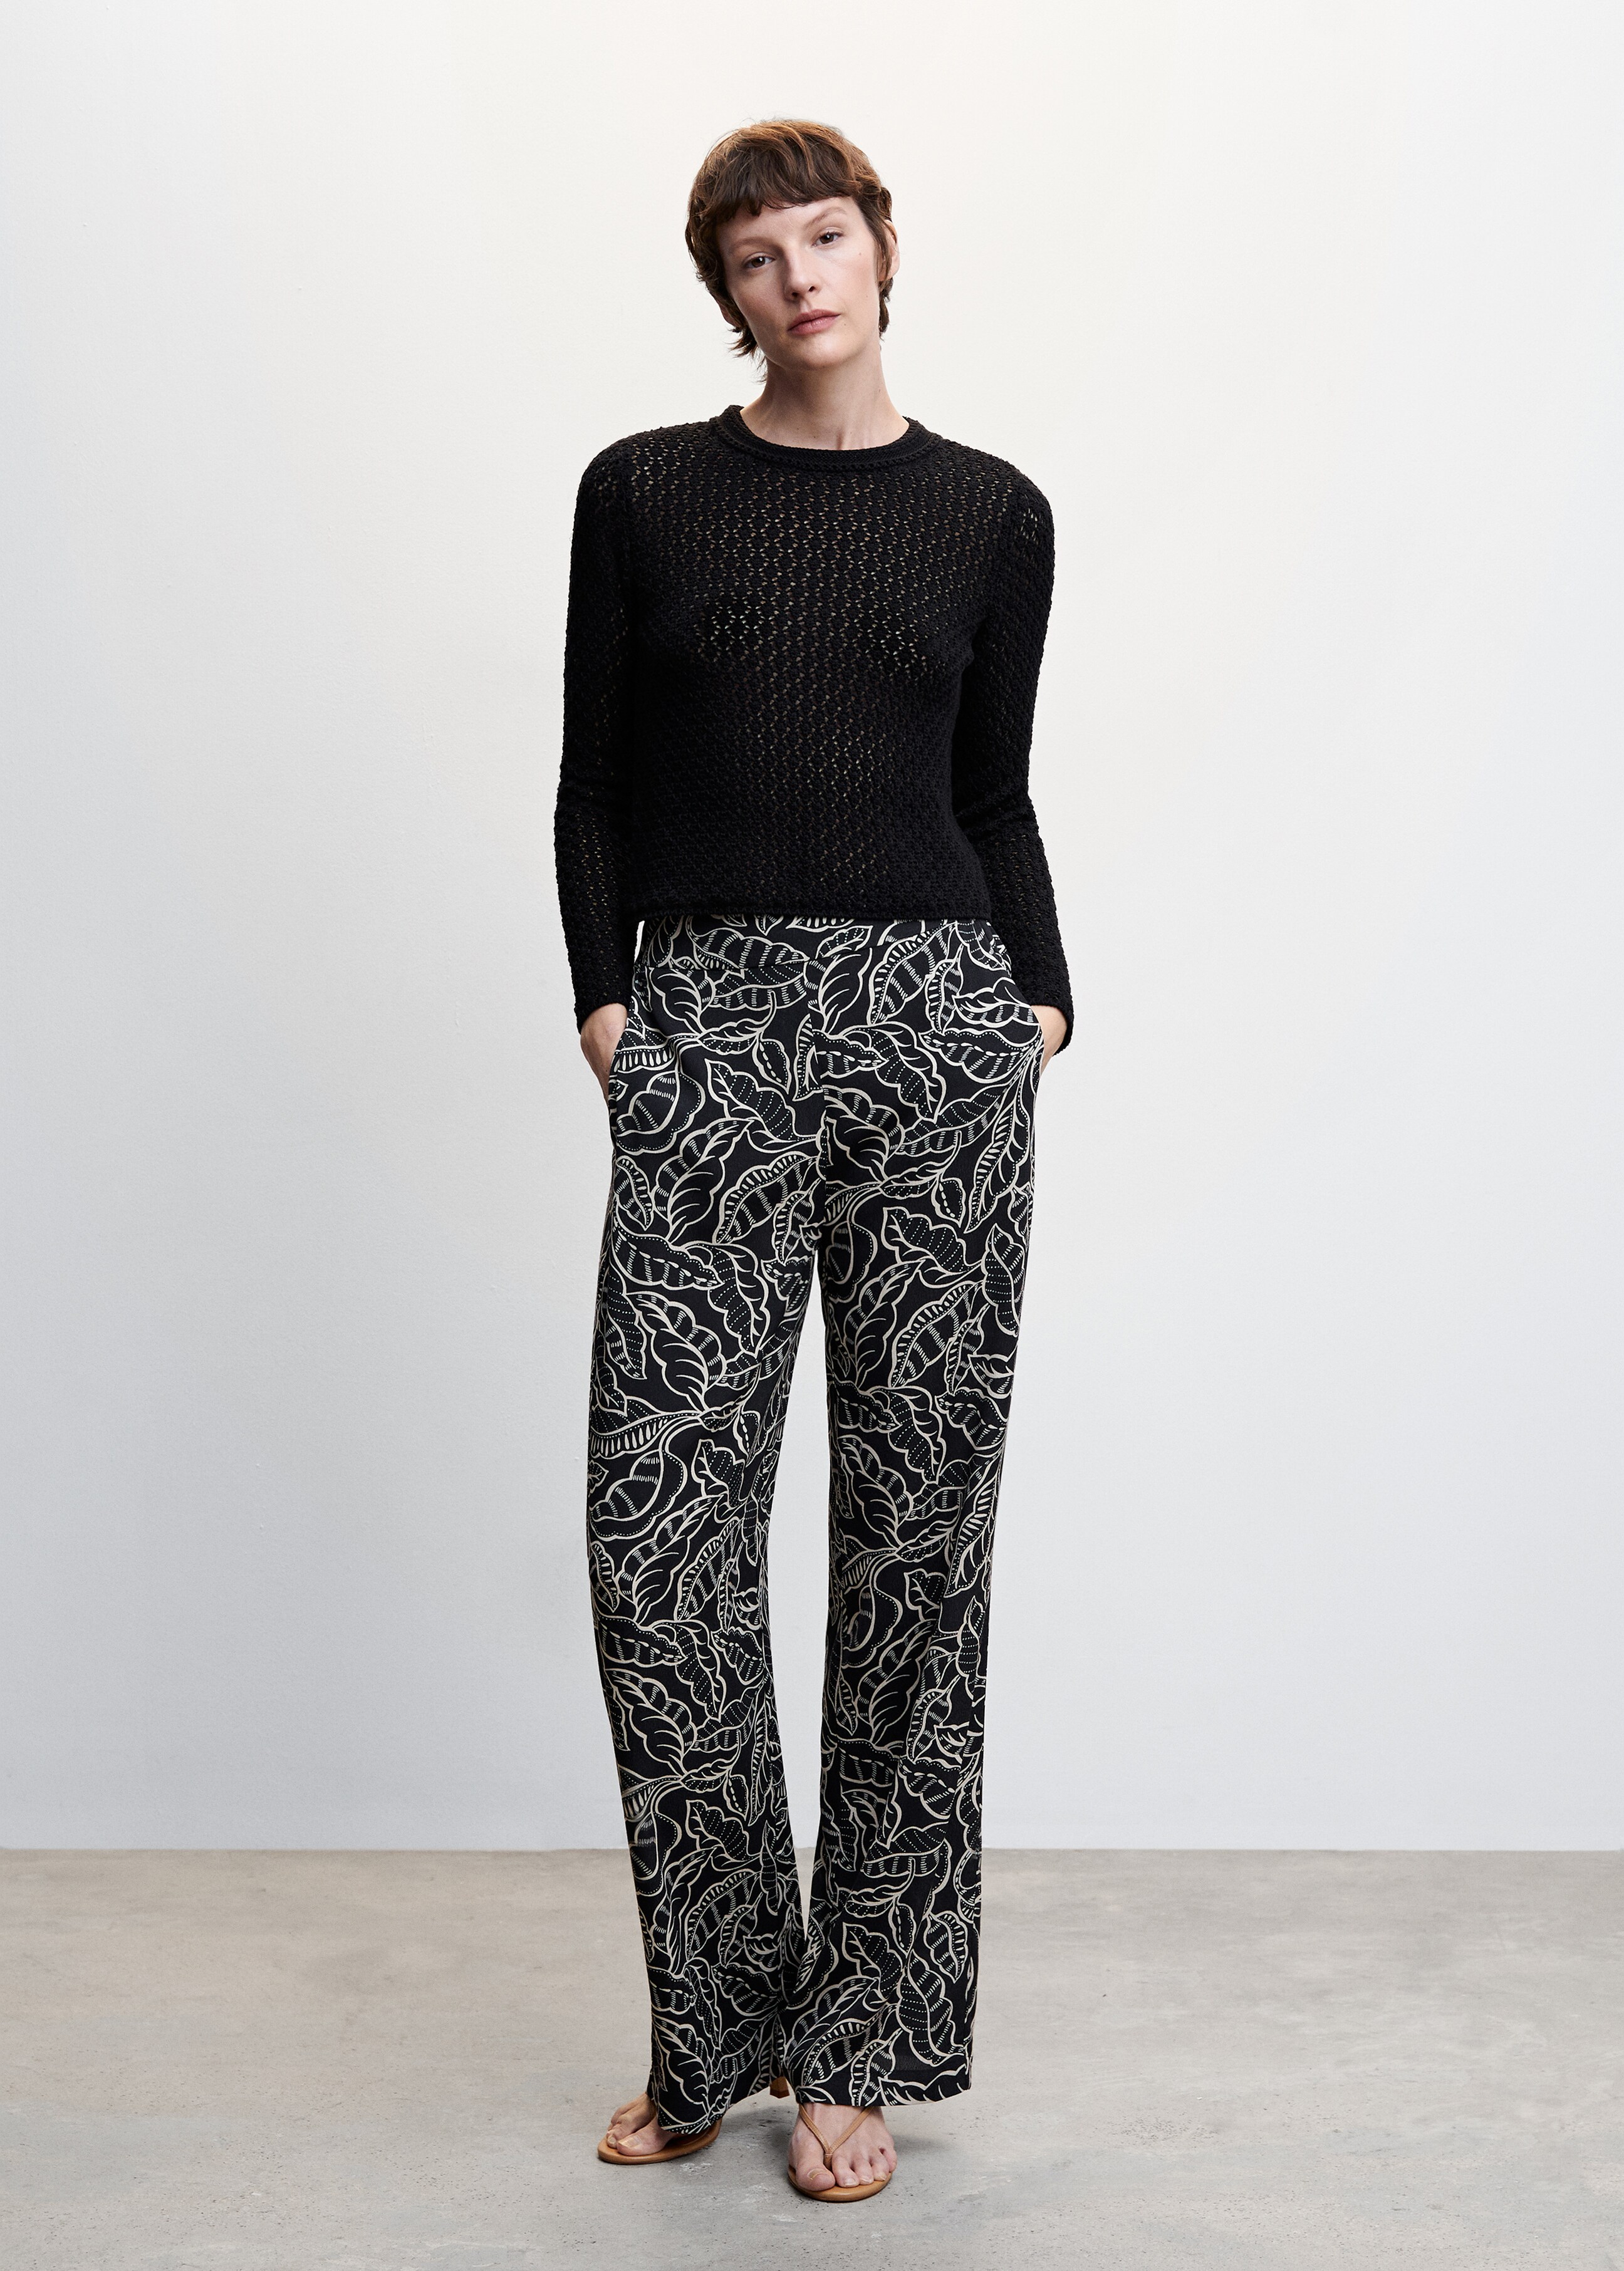 Floral palazzo trousers - General plane